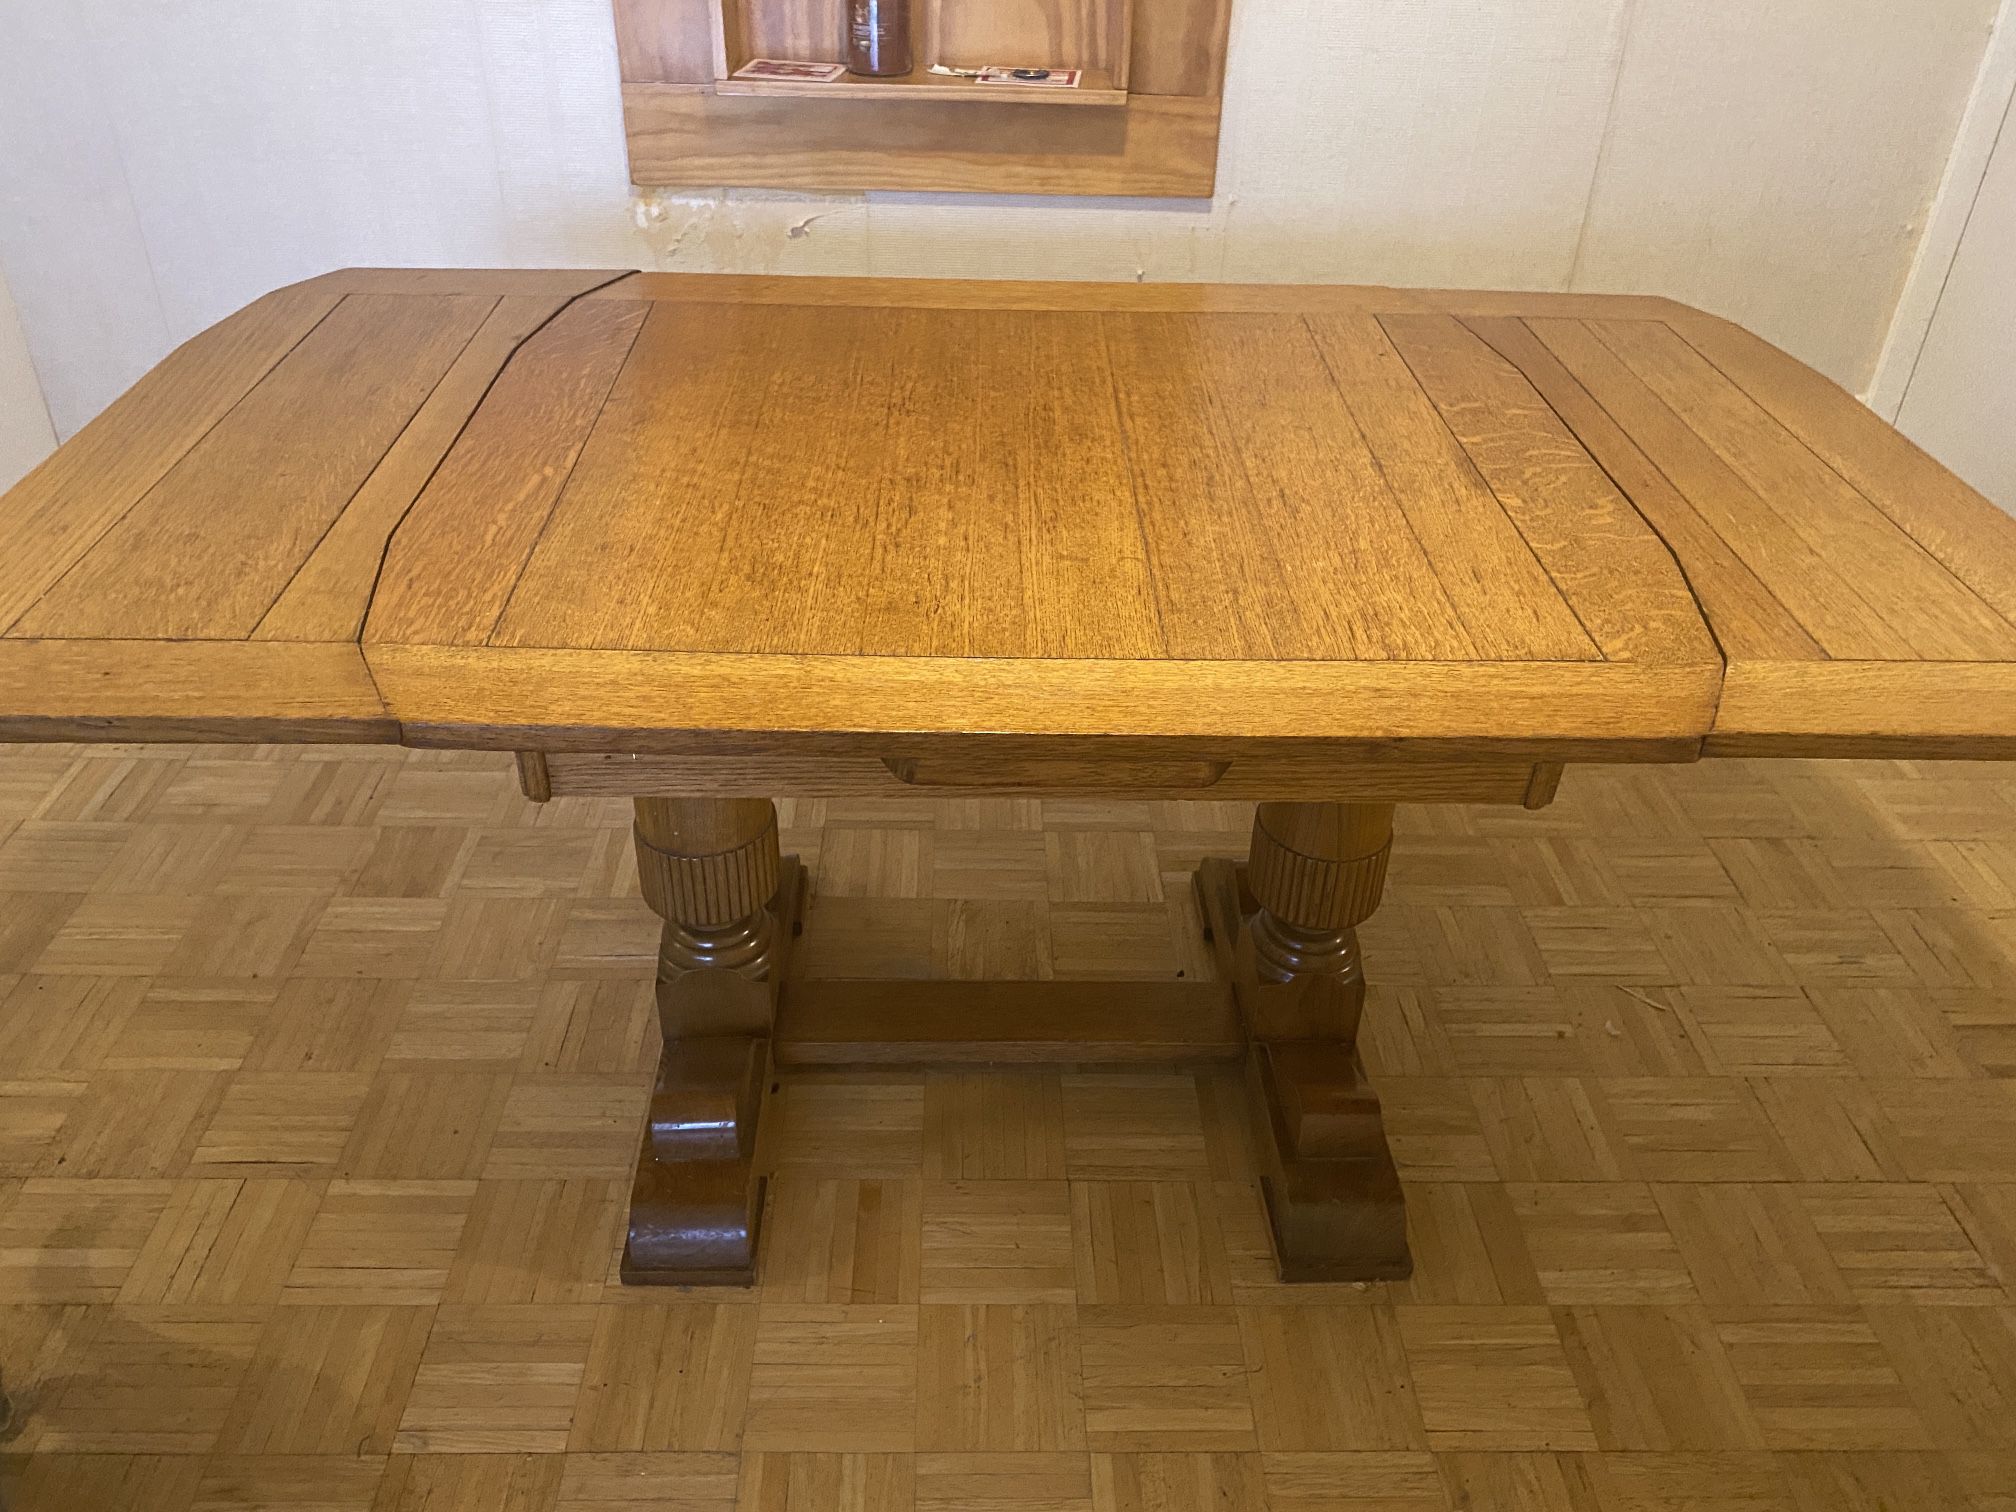 Antique Dining Table With Sliding Leaves